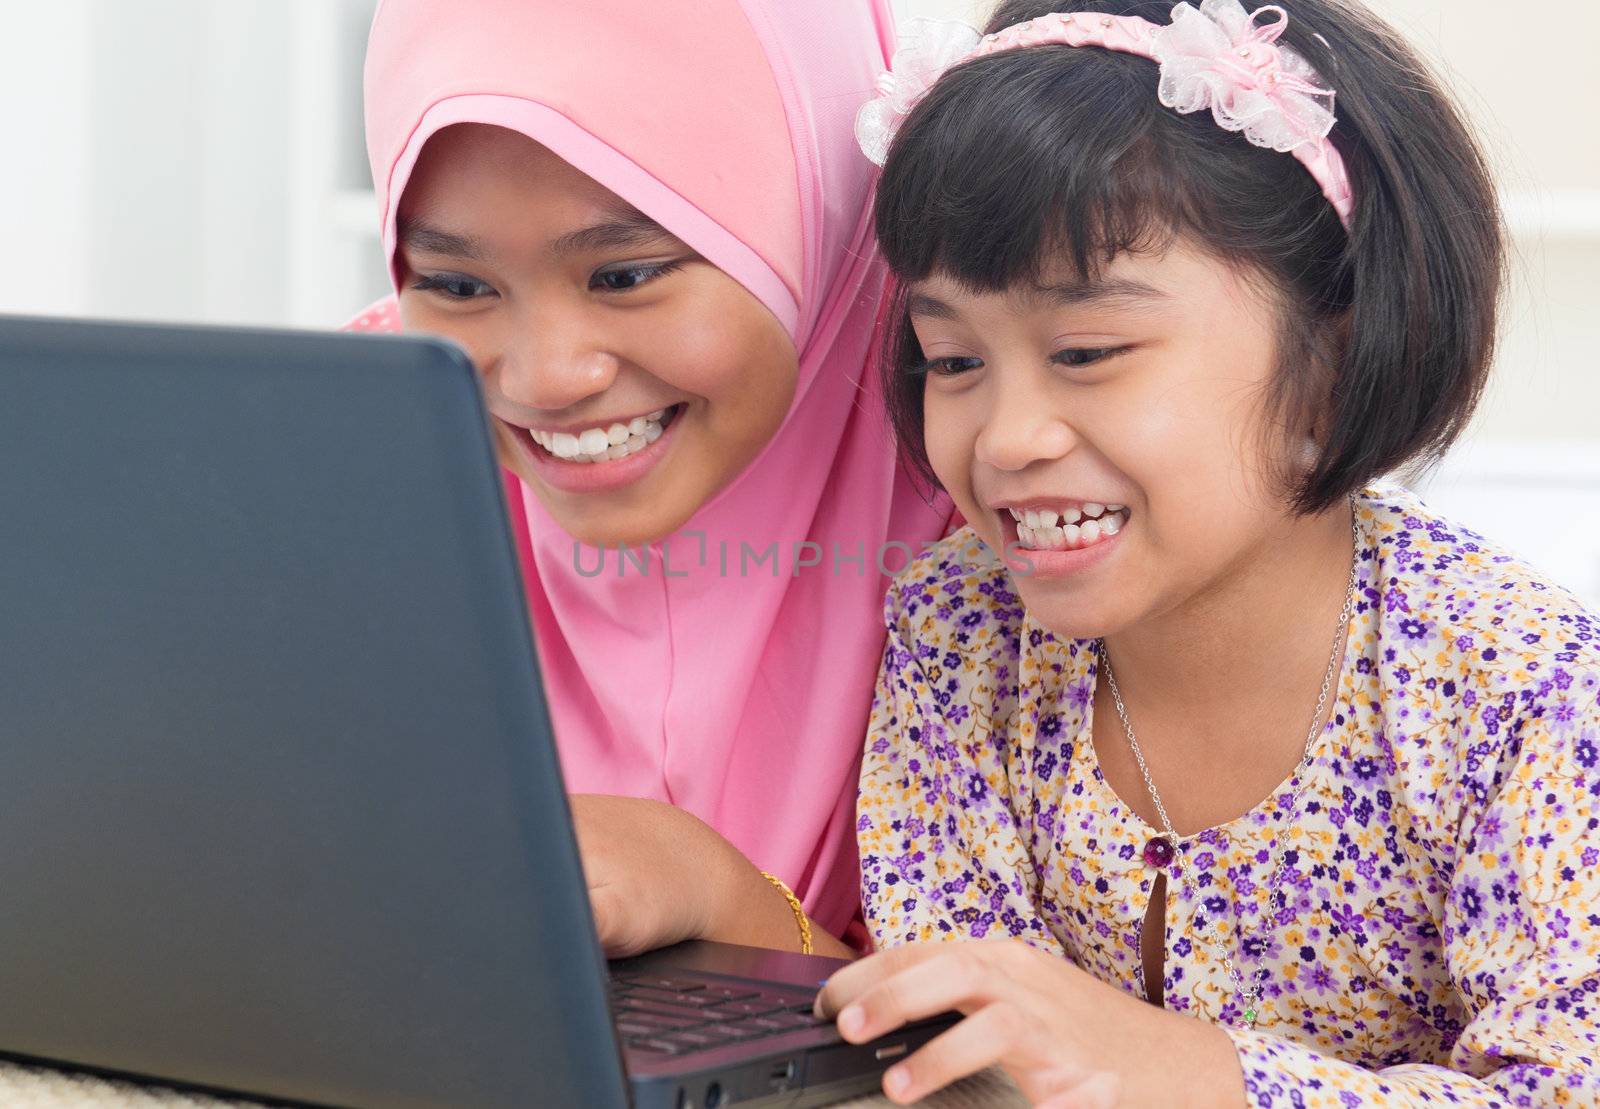 Southeast Asian females surfing internet at home. Malay Muslim girls.